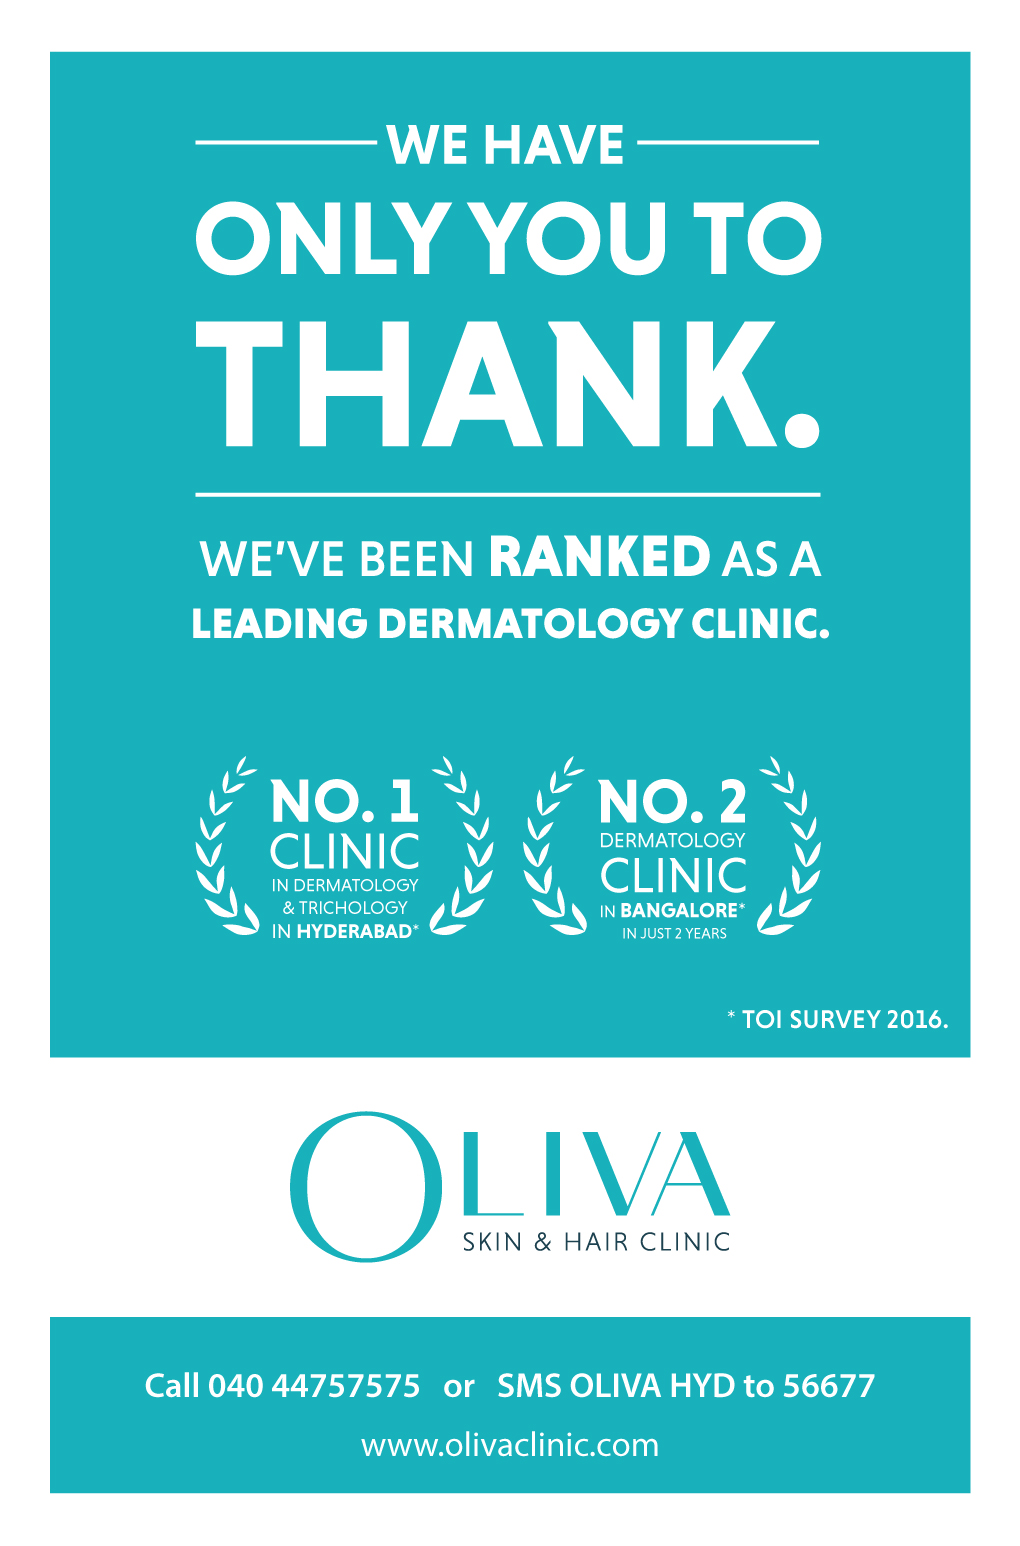 Oliva Skin & Hair Clinic Amongst Leading Trichology and Dermatology Centres  according to Times of India Survey 2016